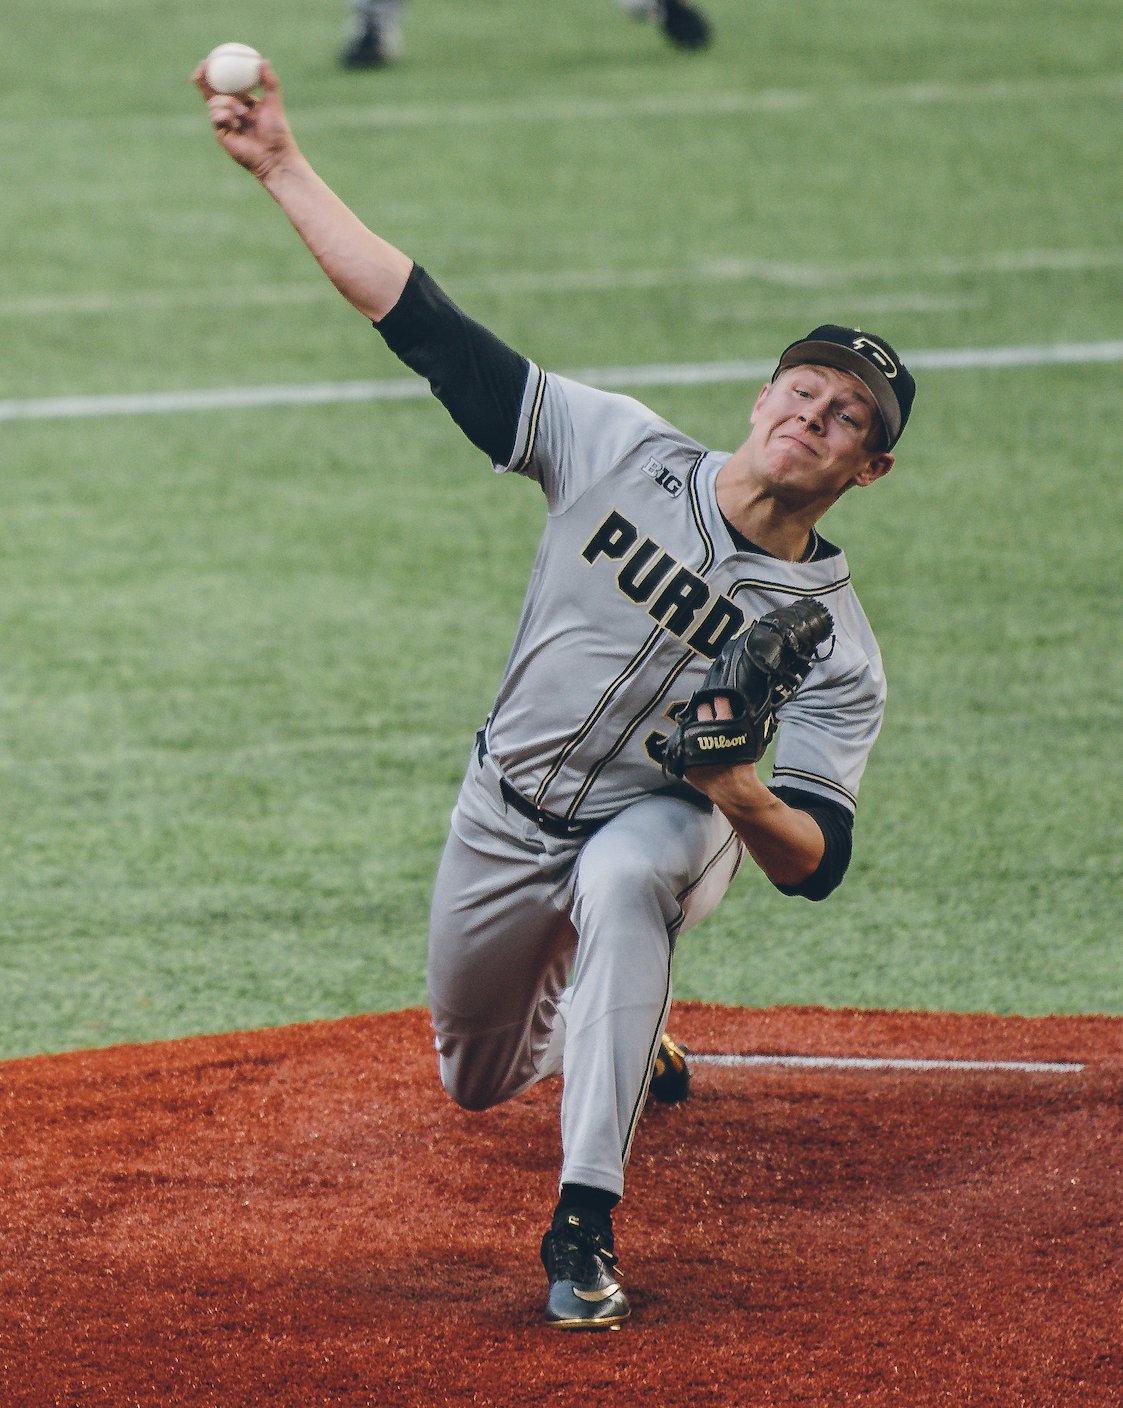 Crawfordsville’s Trent Johnson fires a pitch to the plate in a game early last season for Purdue University. Johnson is entering his senior season for the Boilermakers.